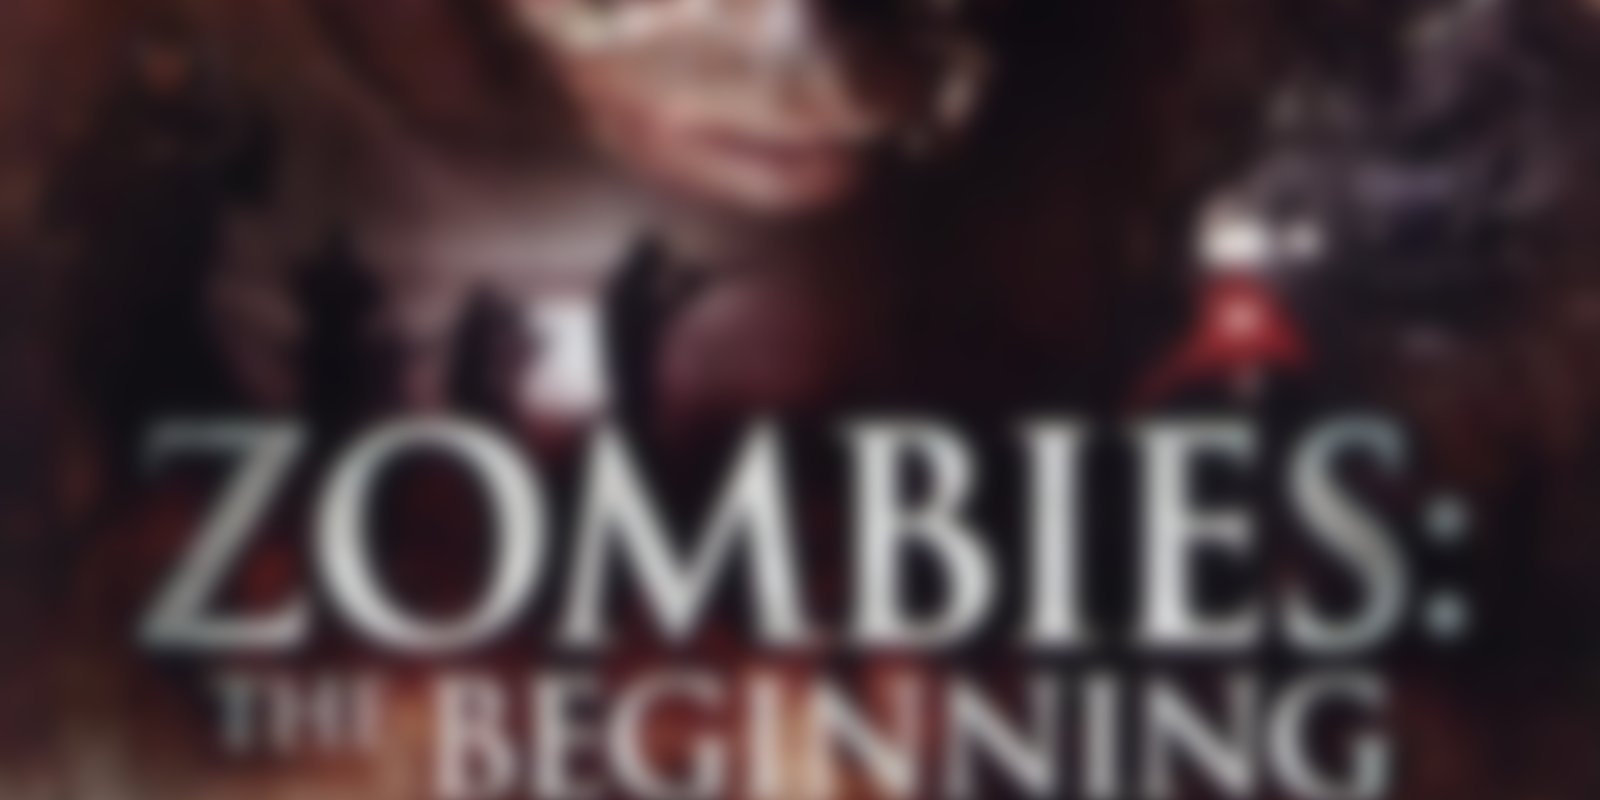 Zombies - The Beginning